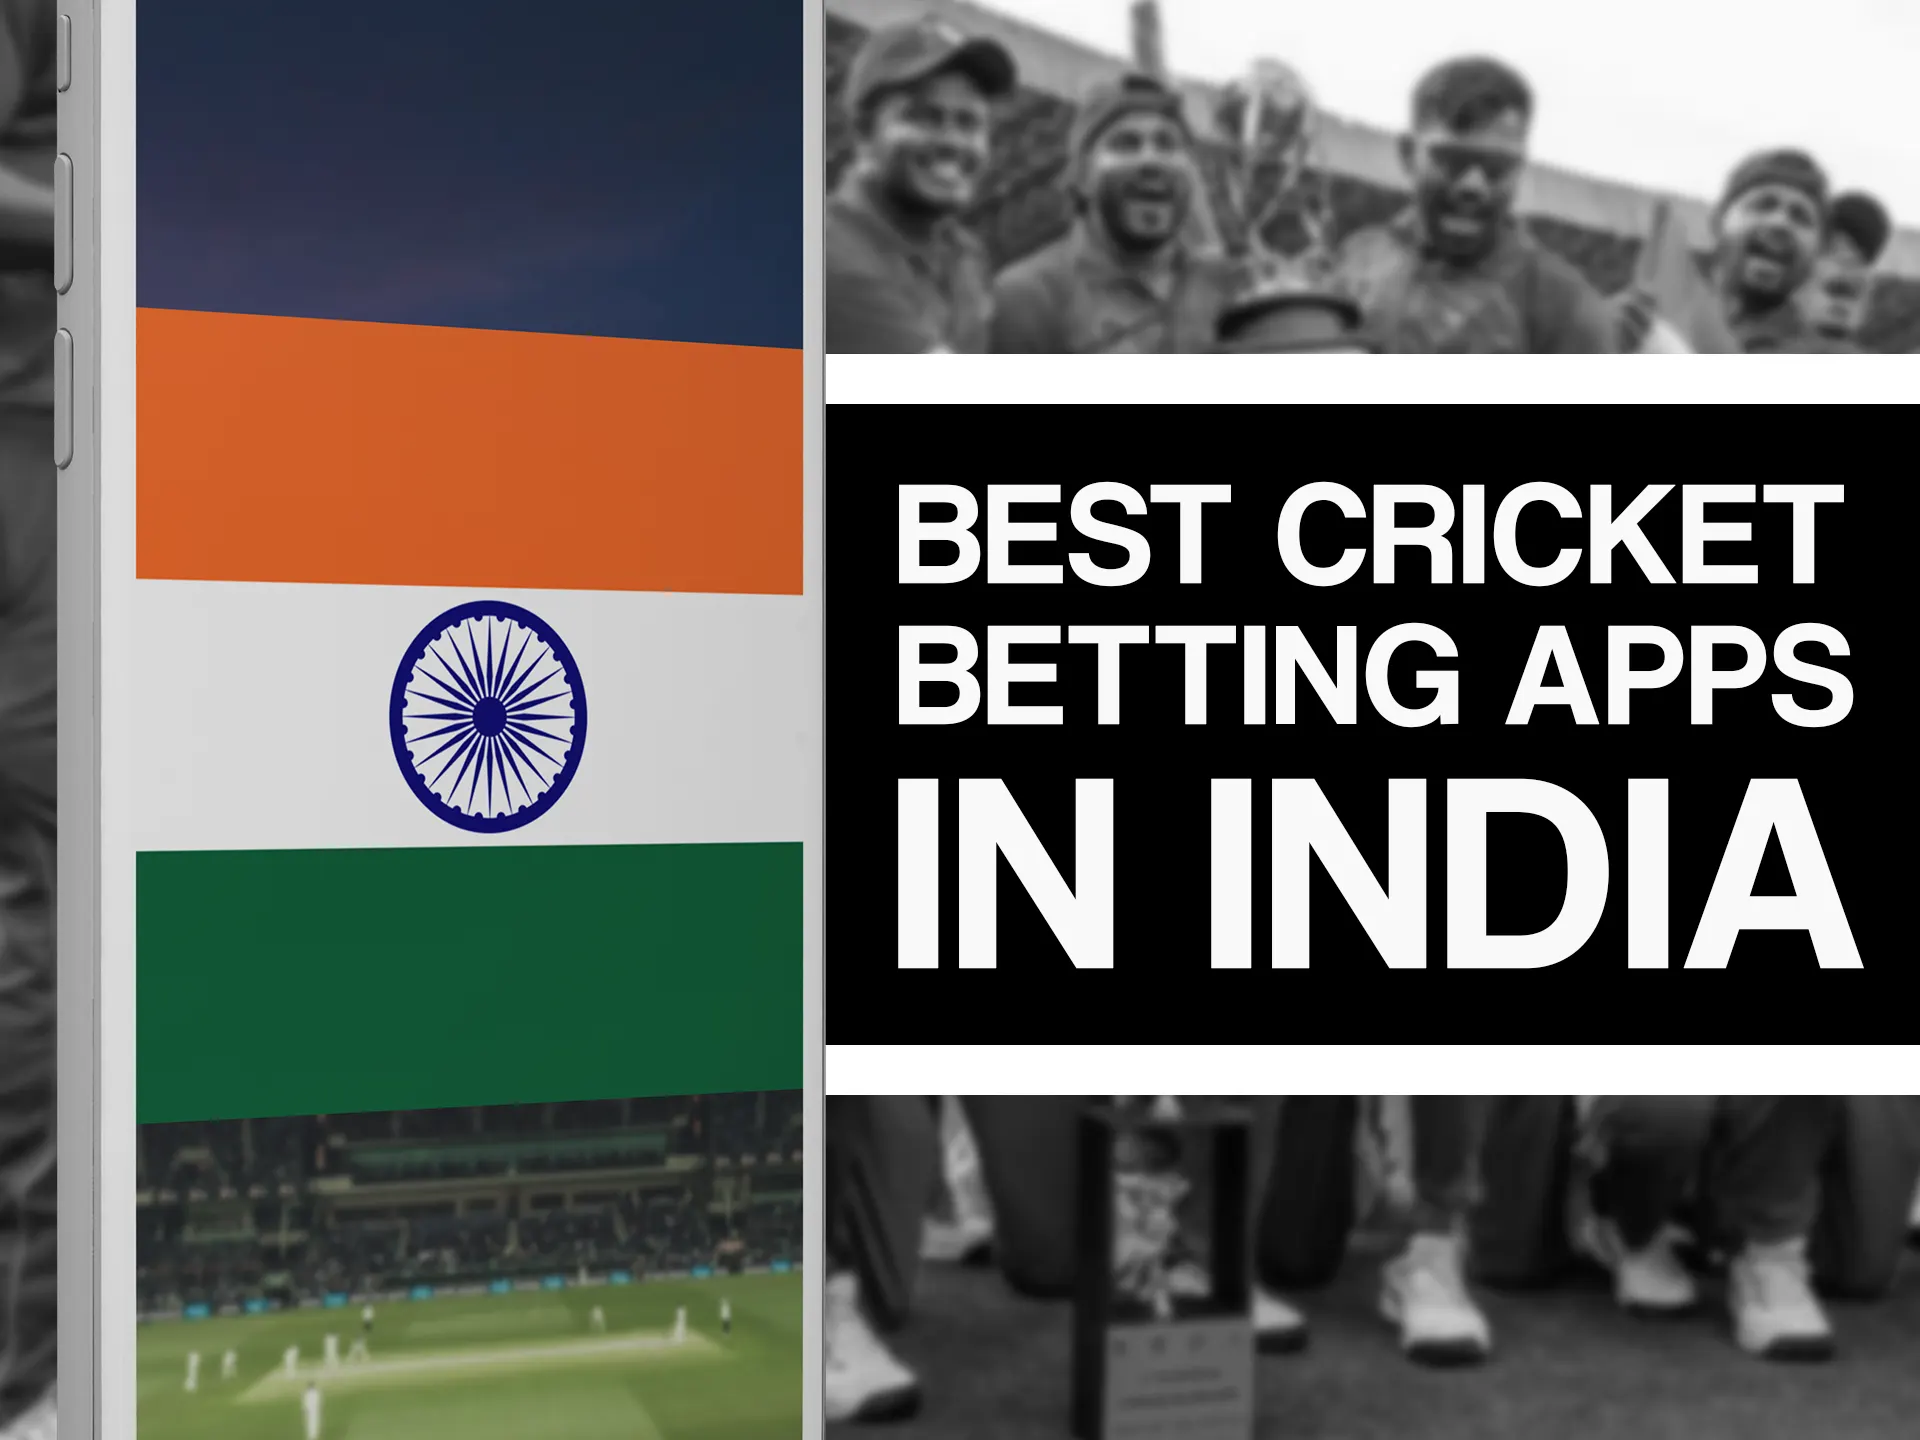 Choose cricket betting app to use in India.